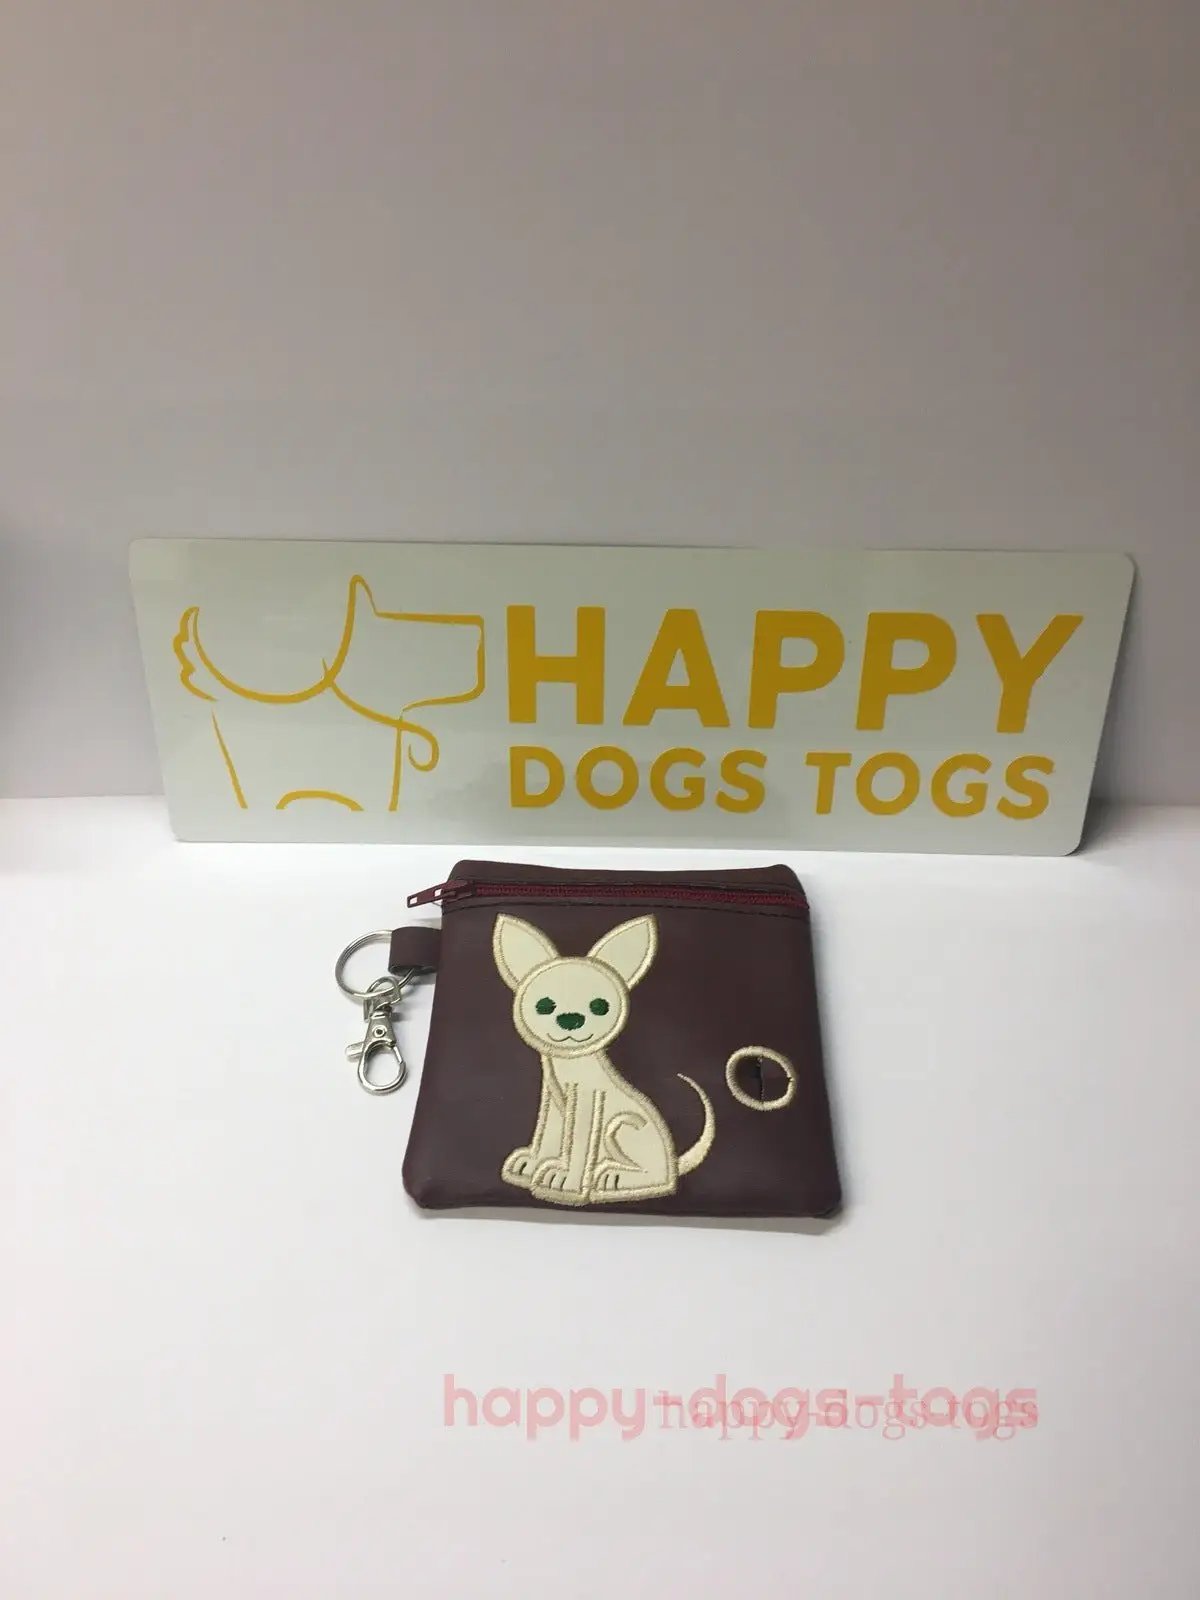 Fawn Chihuahua on Burgundy Faux leather dog poo bag dispenser